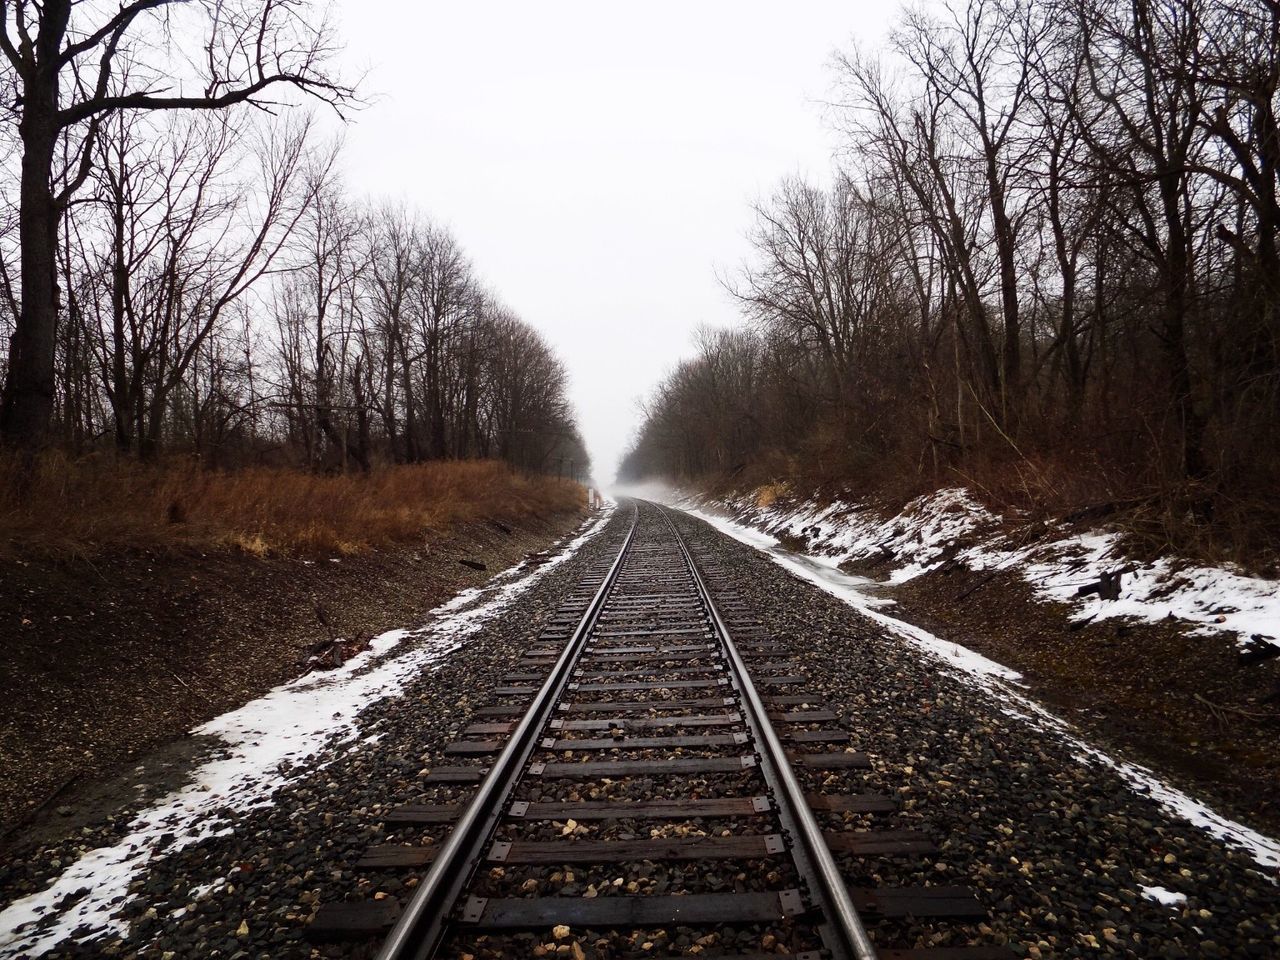 bare tree, track, direction, the way forward, rail transportation, tree, railroad track, transportation, diminishing perspective, sky, no people, vanishing point, clear sky, cold temperature, snow, plant, nature, winter, day, outdoors, straight, long, parallel